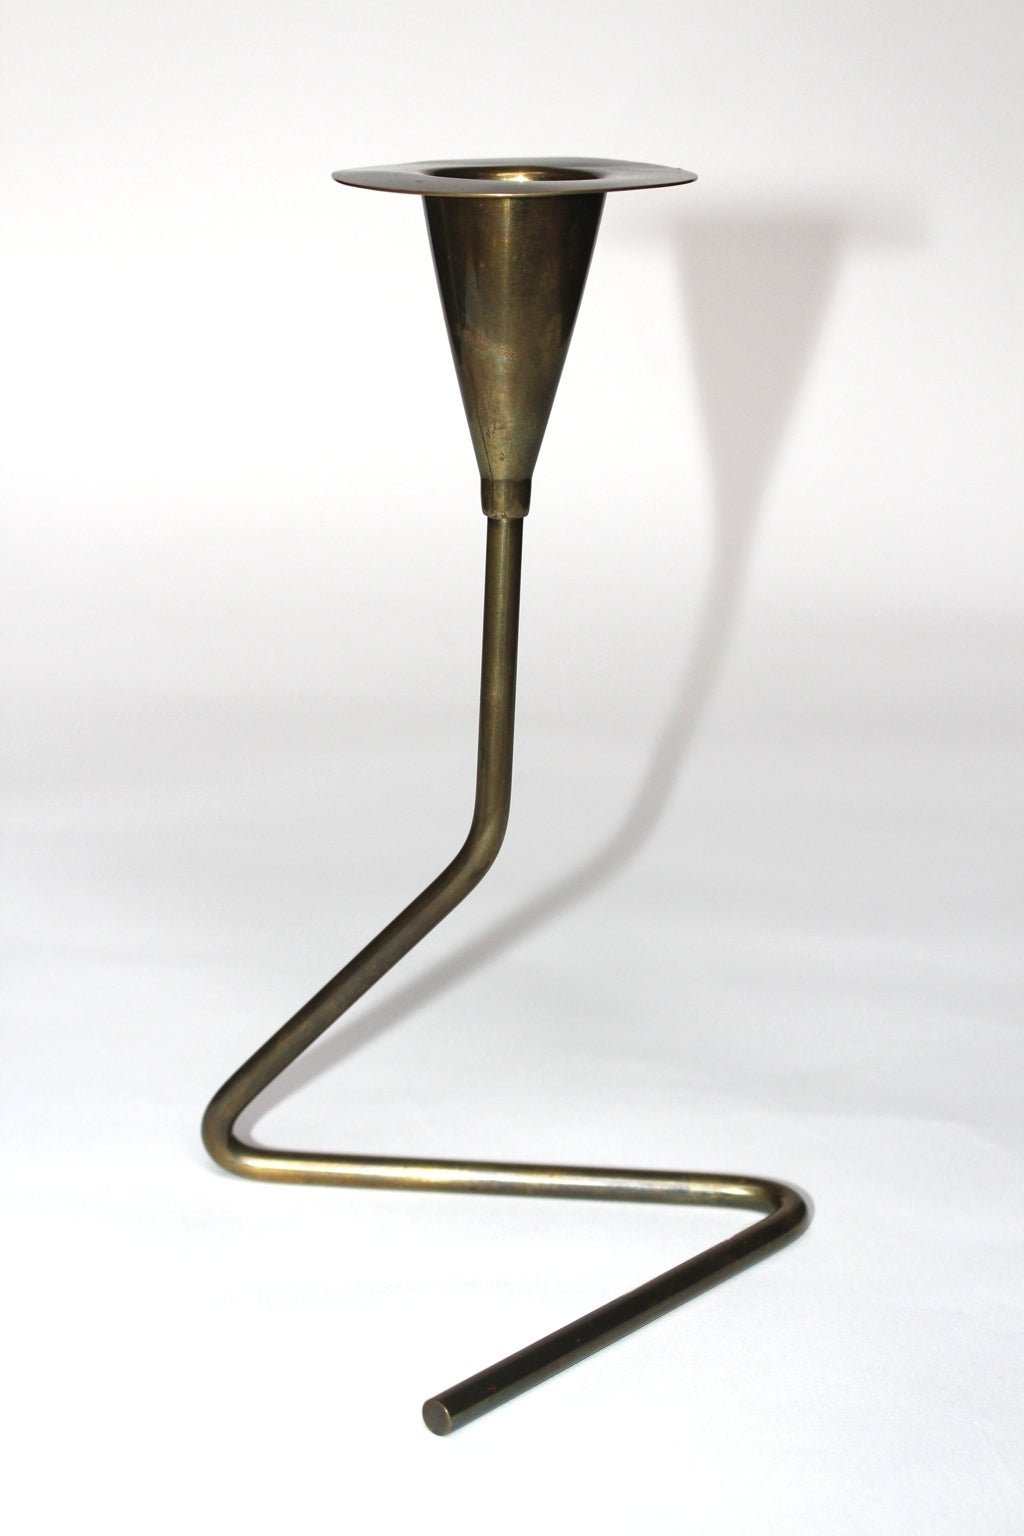 This mid century modern Carl Auböck brass vintage candlestick / candelabras shows a great patina and a beautiful shape.

All measures are approximate.
Width: 12.5 cm
Depth: 13 cm
Height: 21.5 cm

